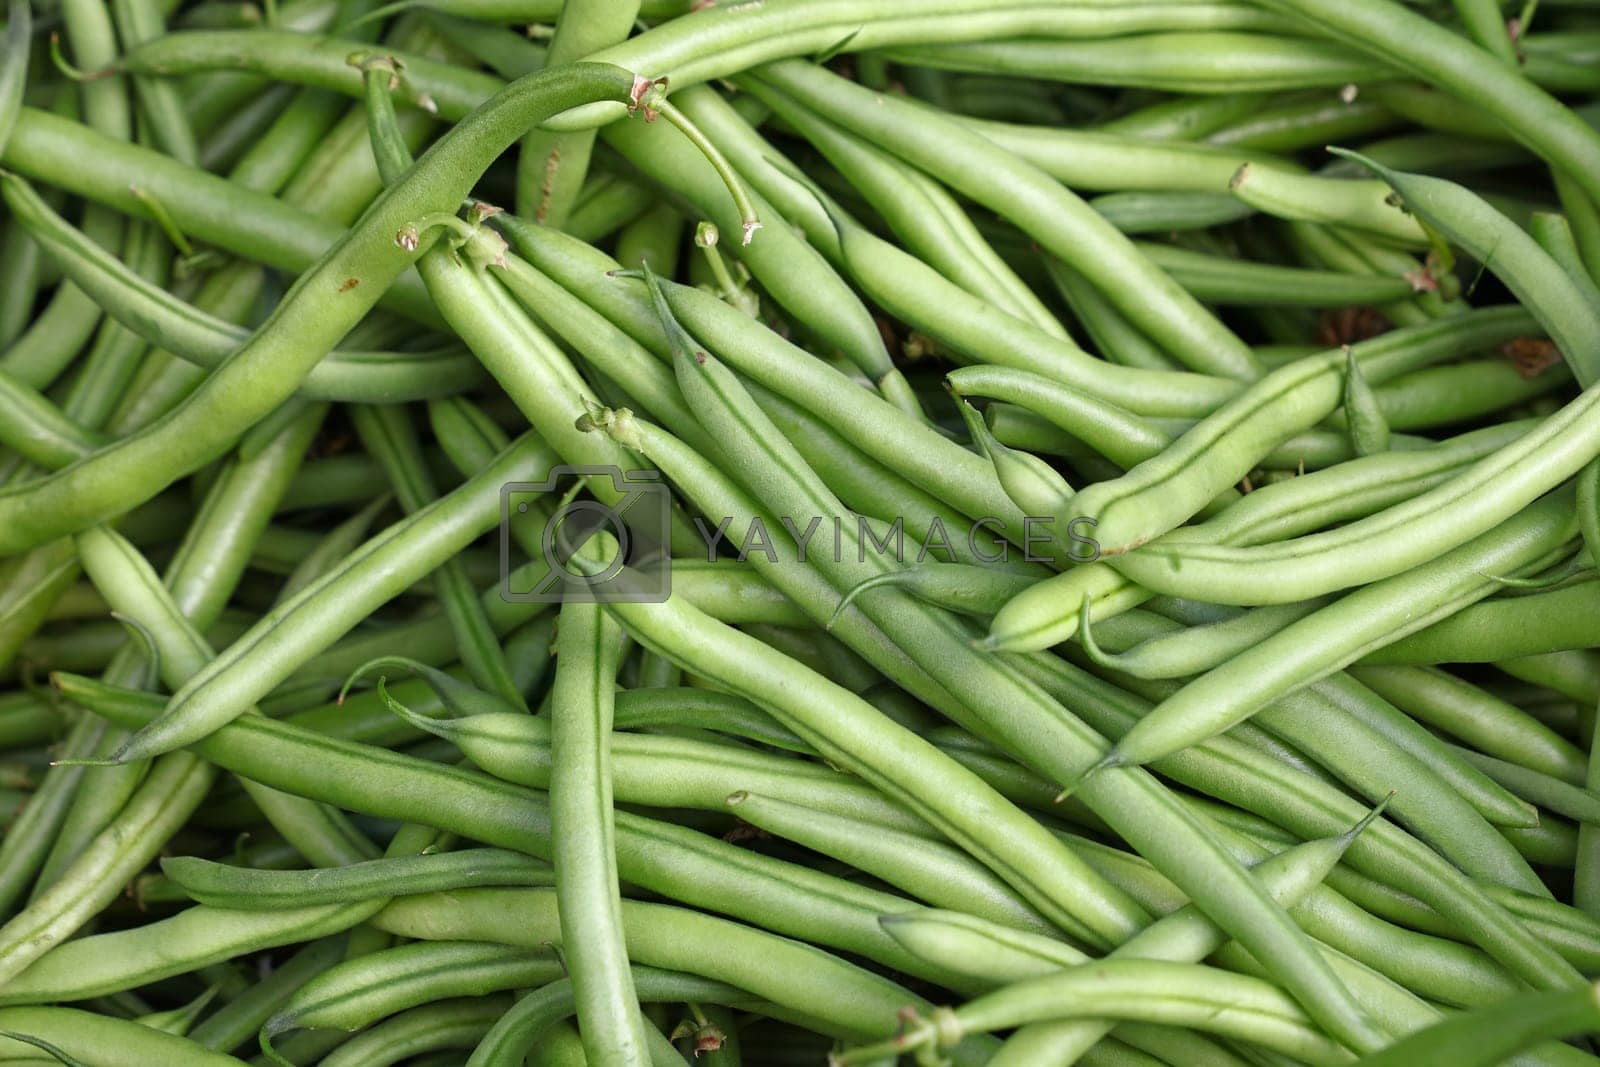 Royalty free image of Heap of fresh green beans on market stall by BreakingTheWalls